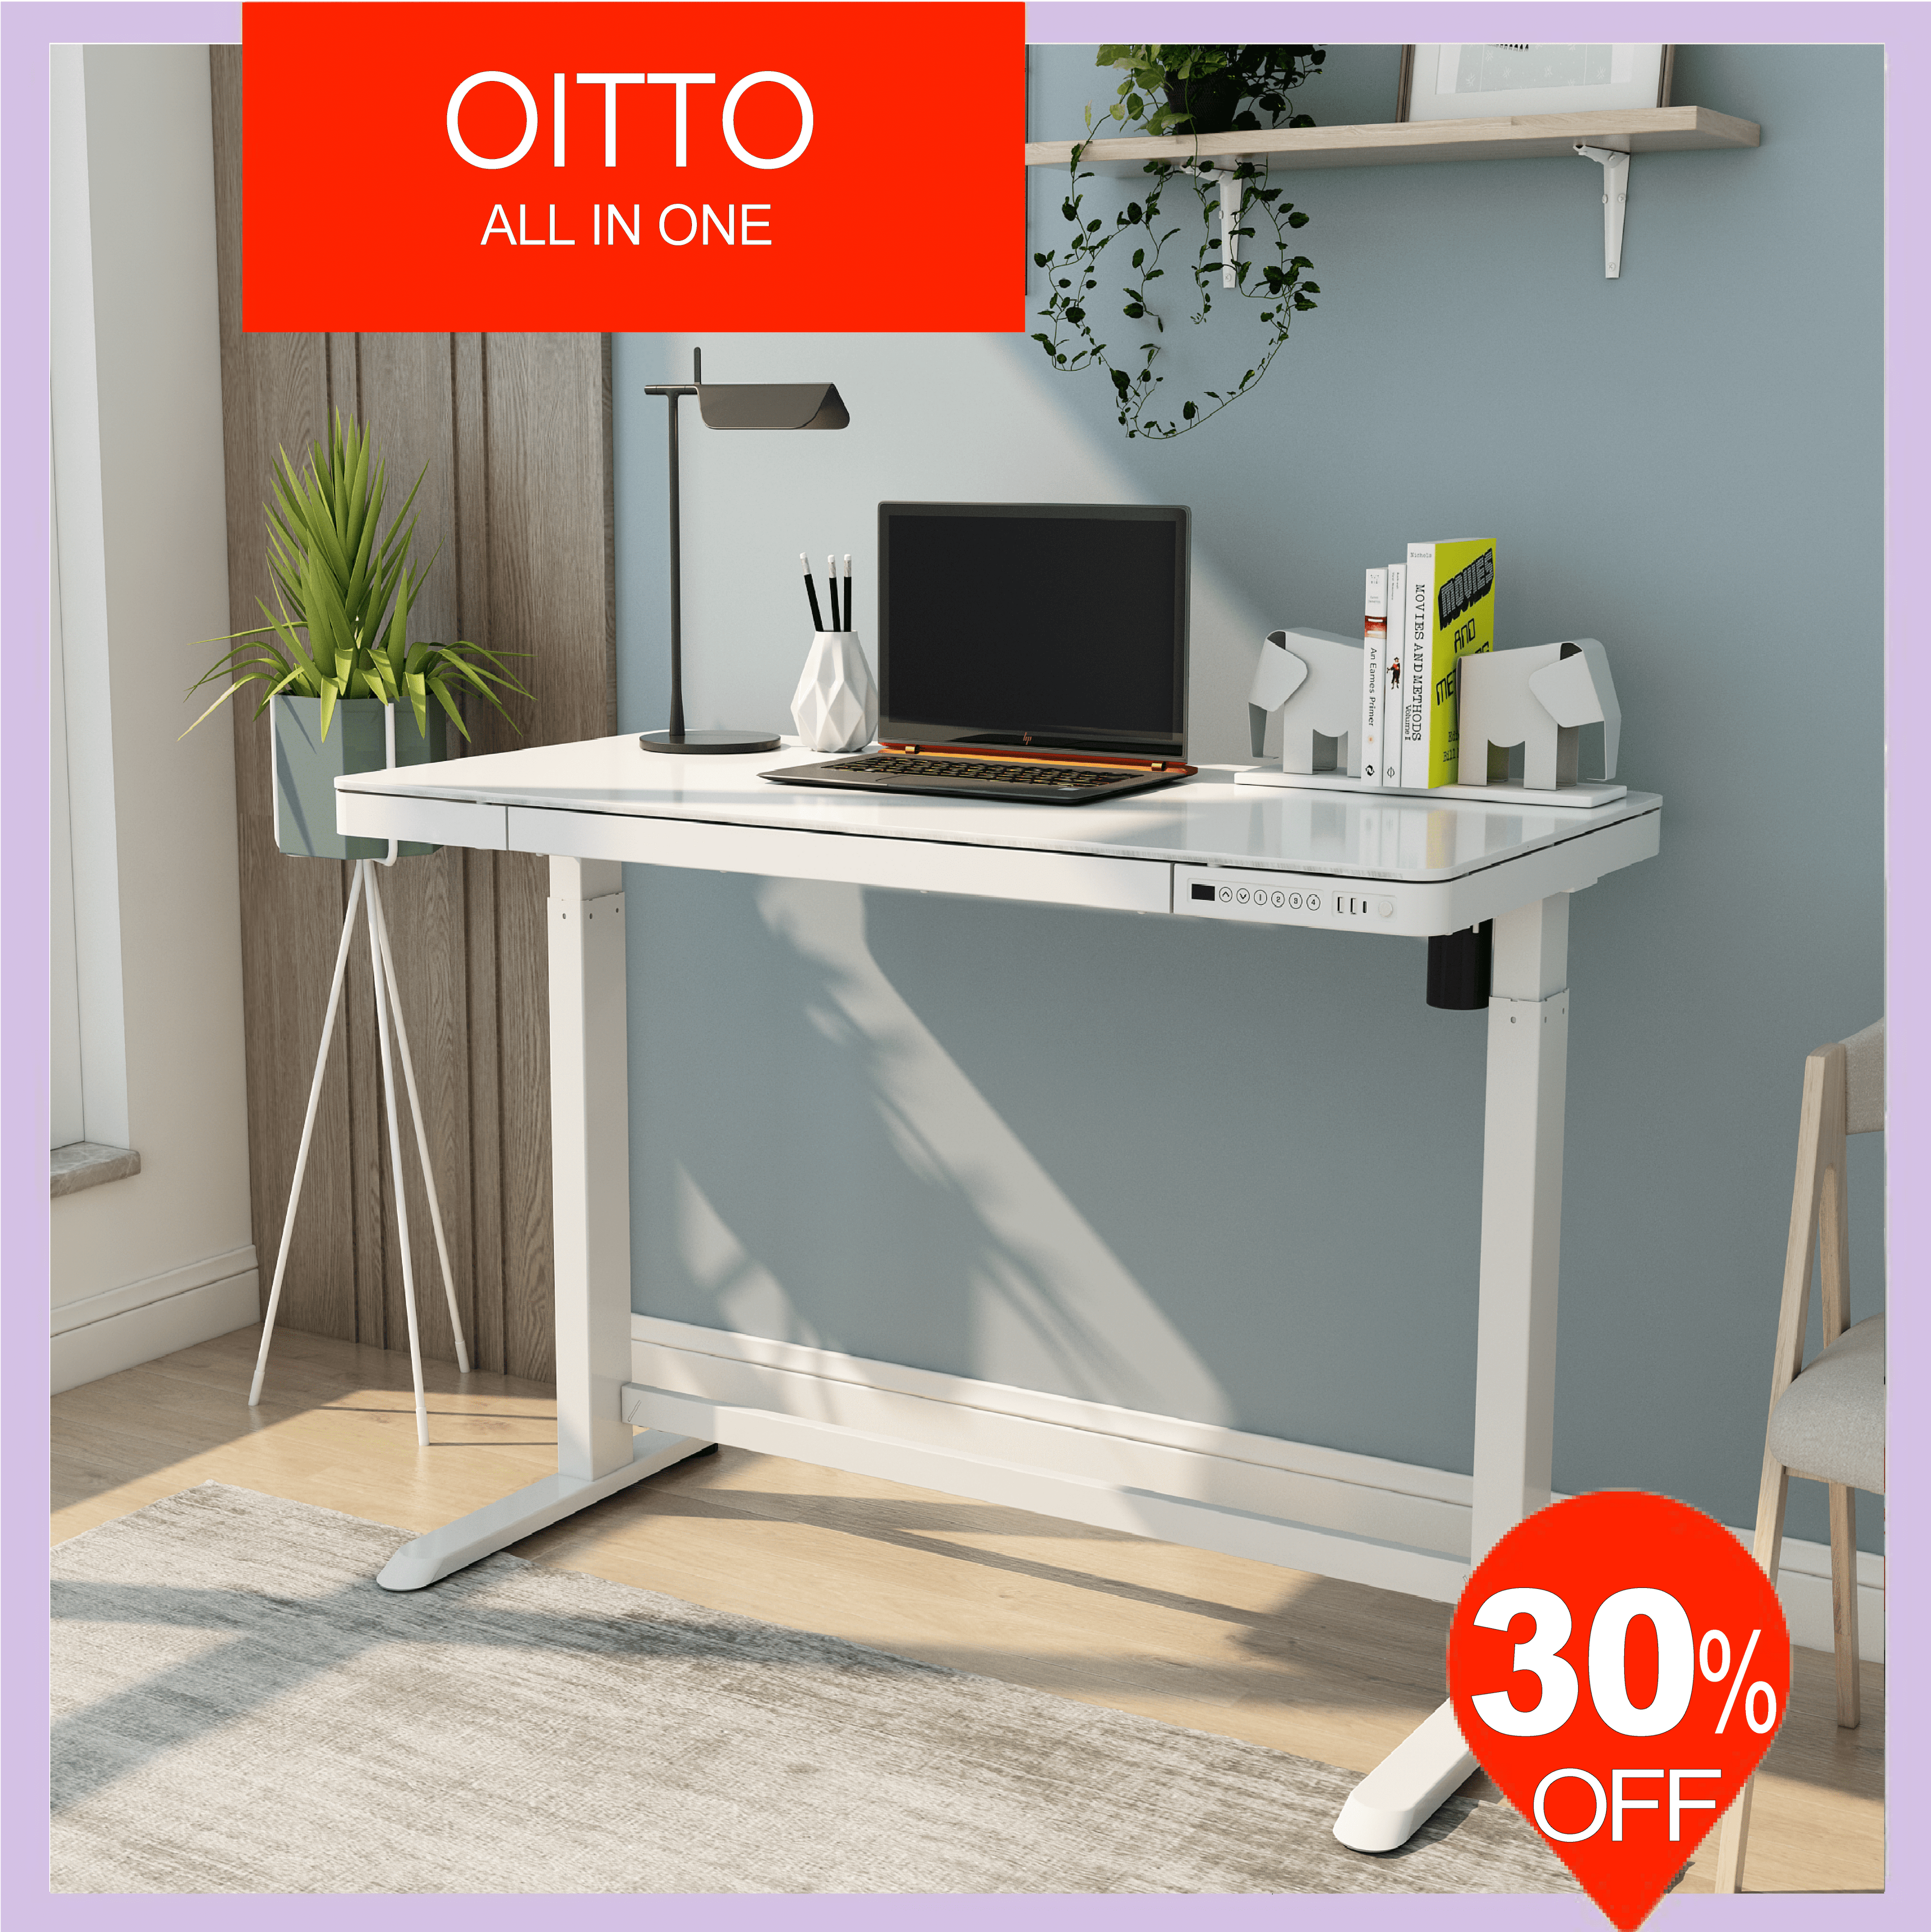 Load video: OITTO ALL IN ONE sit stand desk